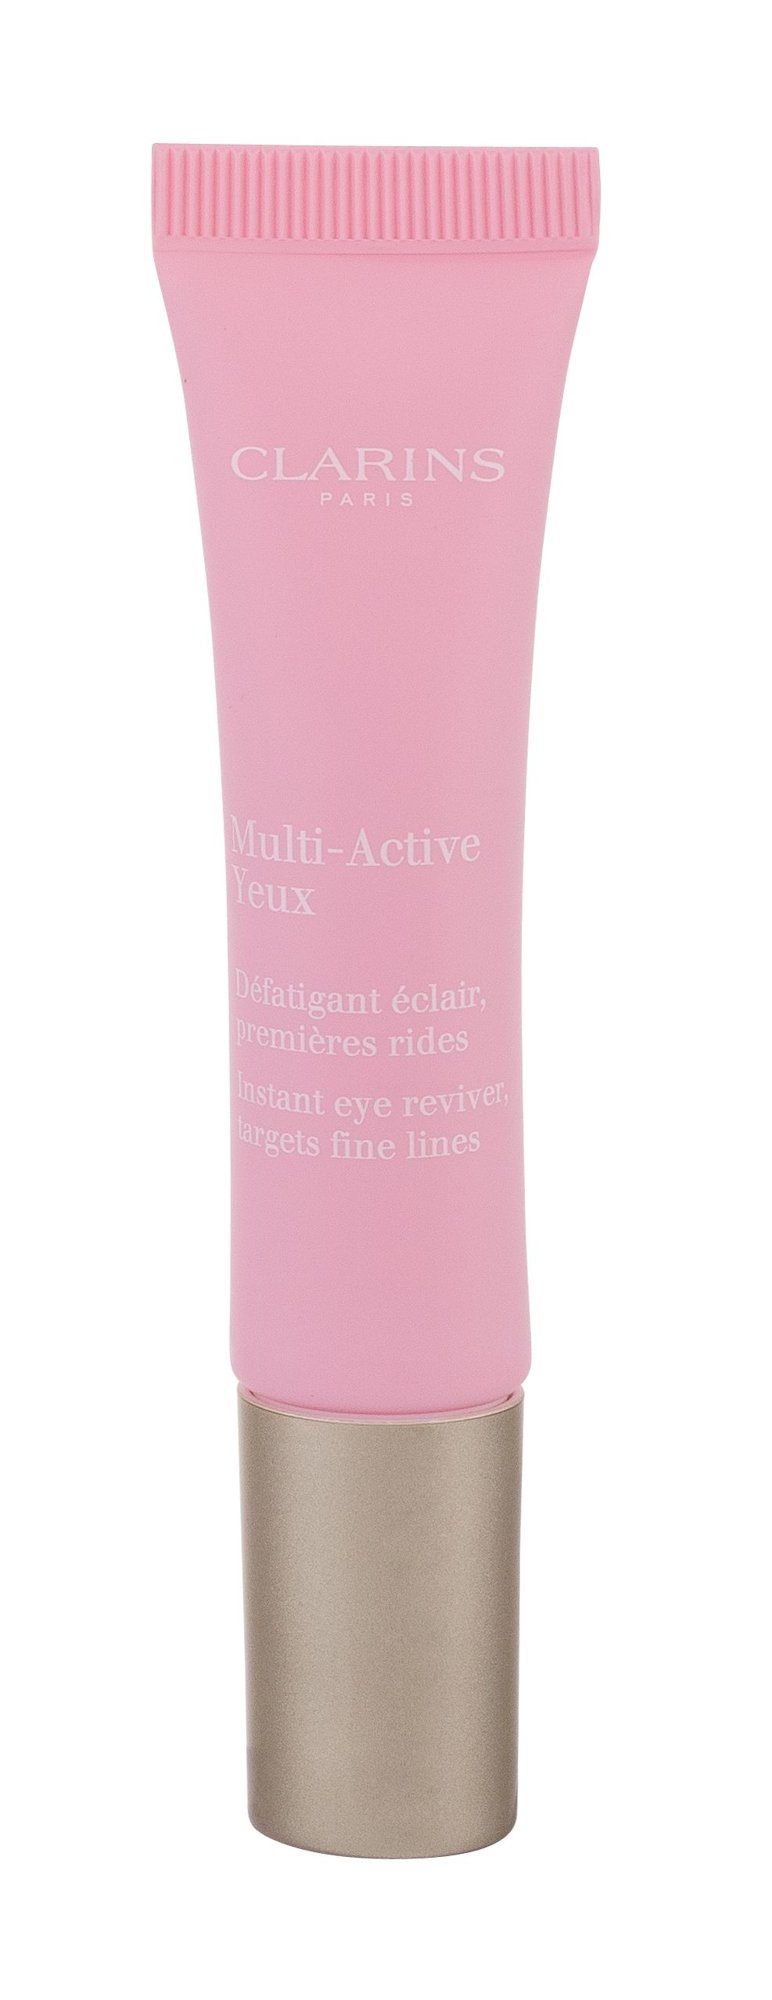 Clarins Multi-Active Instant Eye Care